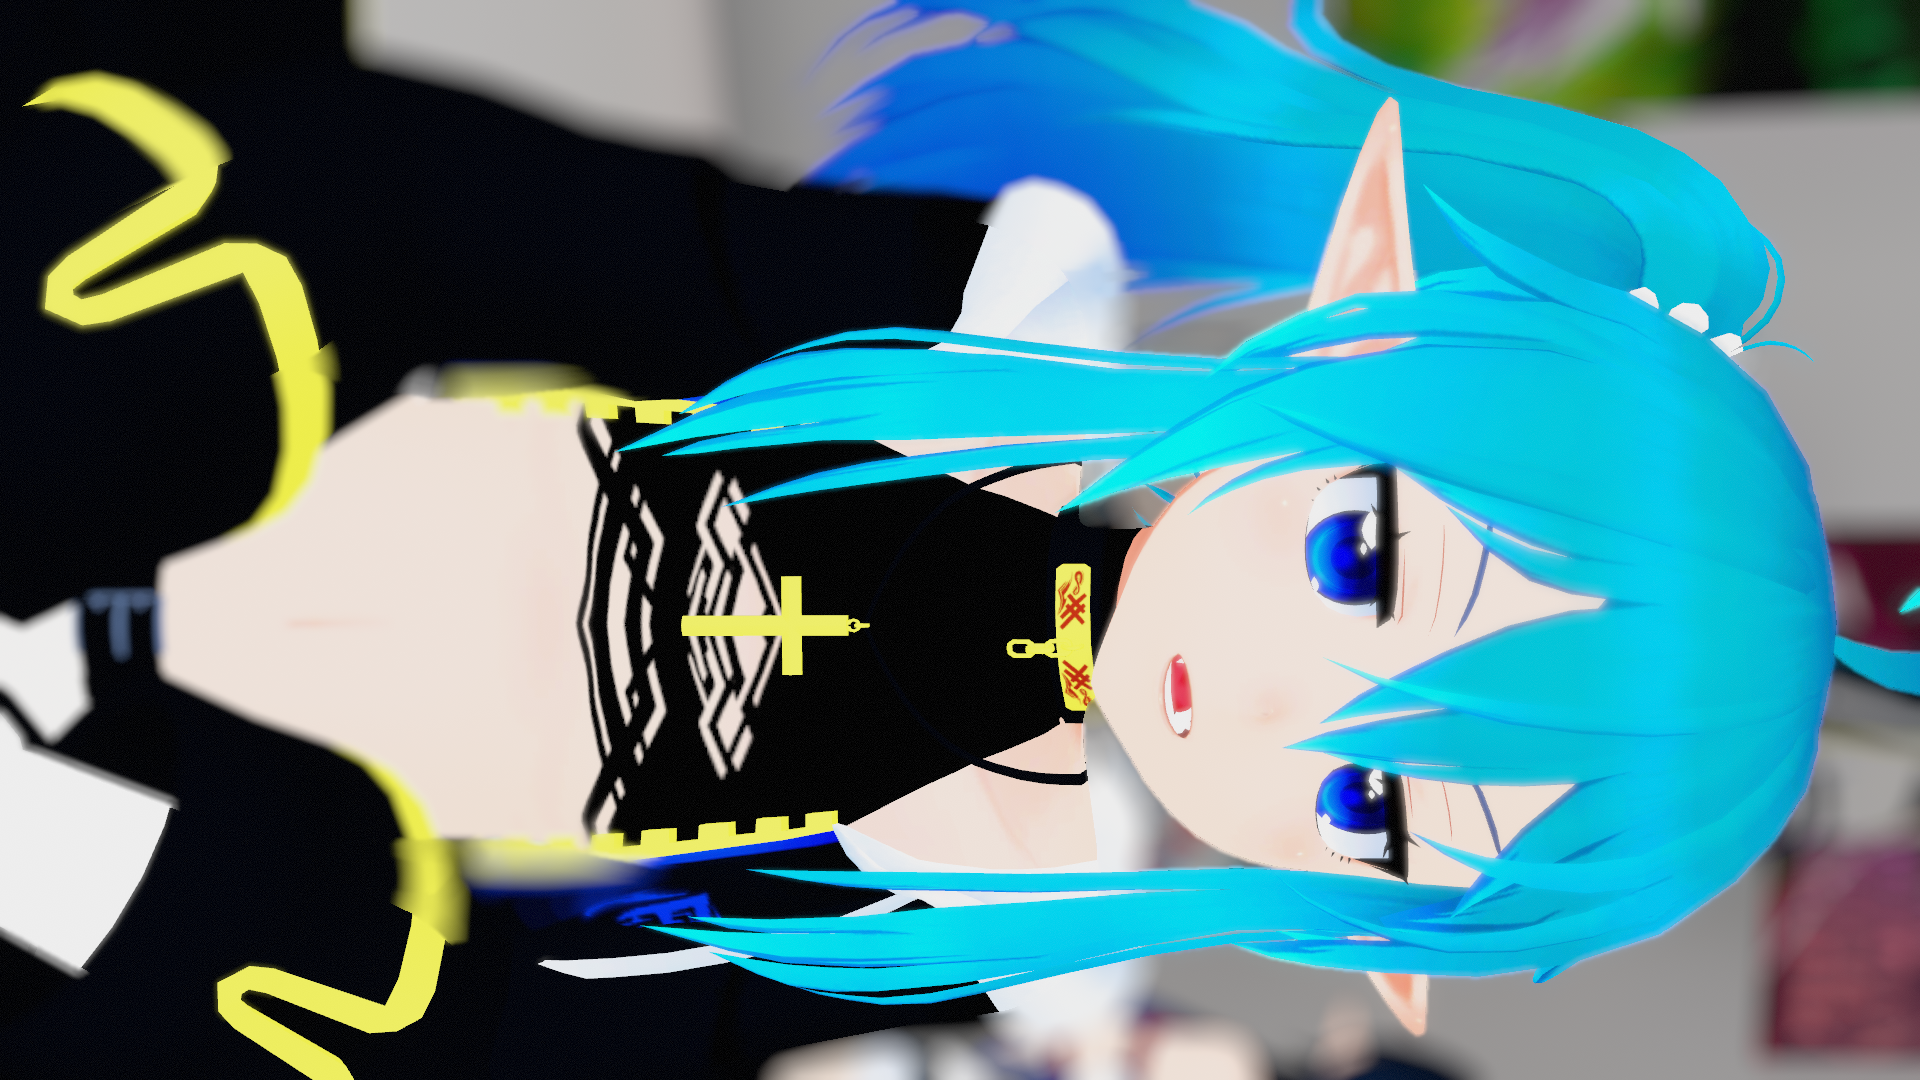 VRChat_1920x1080_2021-12-05_05-31-46.942.png